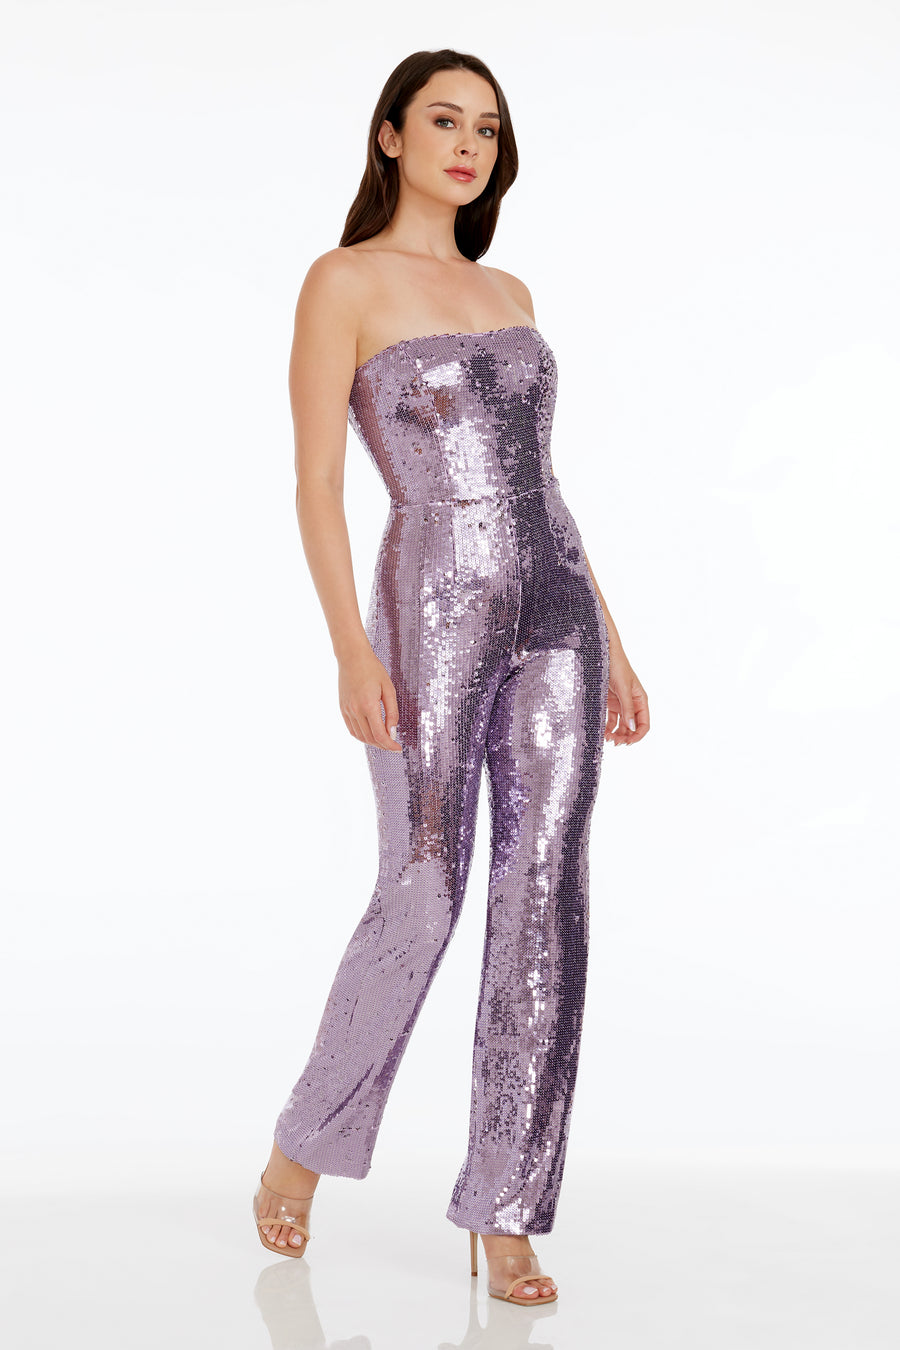 Sequins EVERYTHANG: jumpsuits, dresses, and tops — Everyday Pursuits